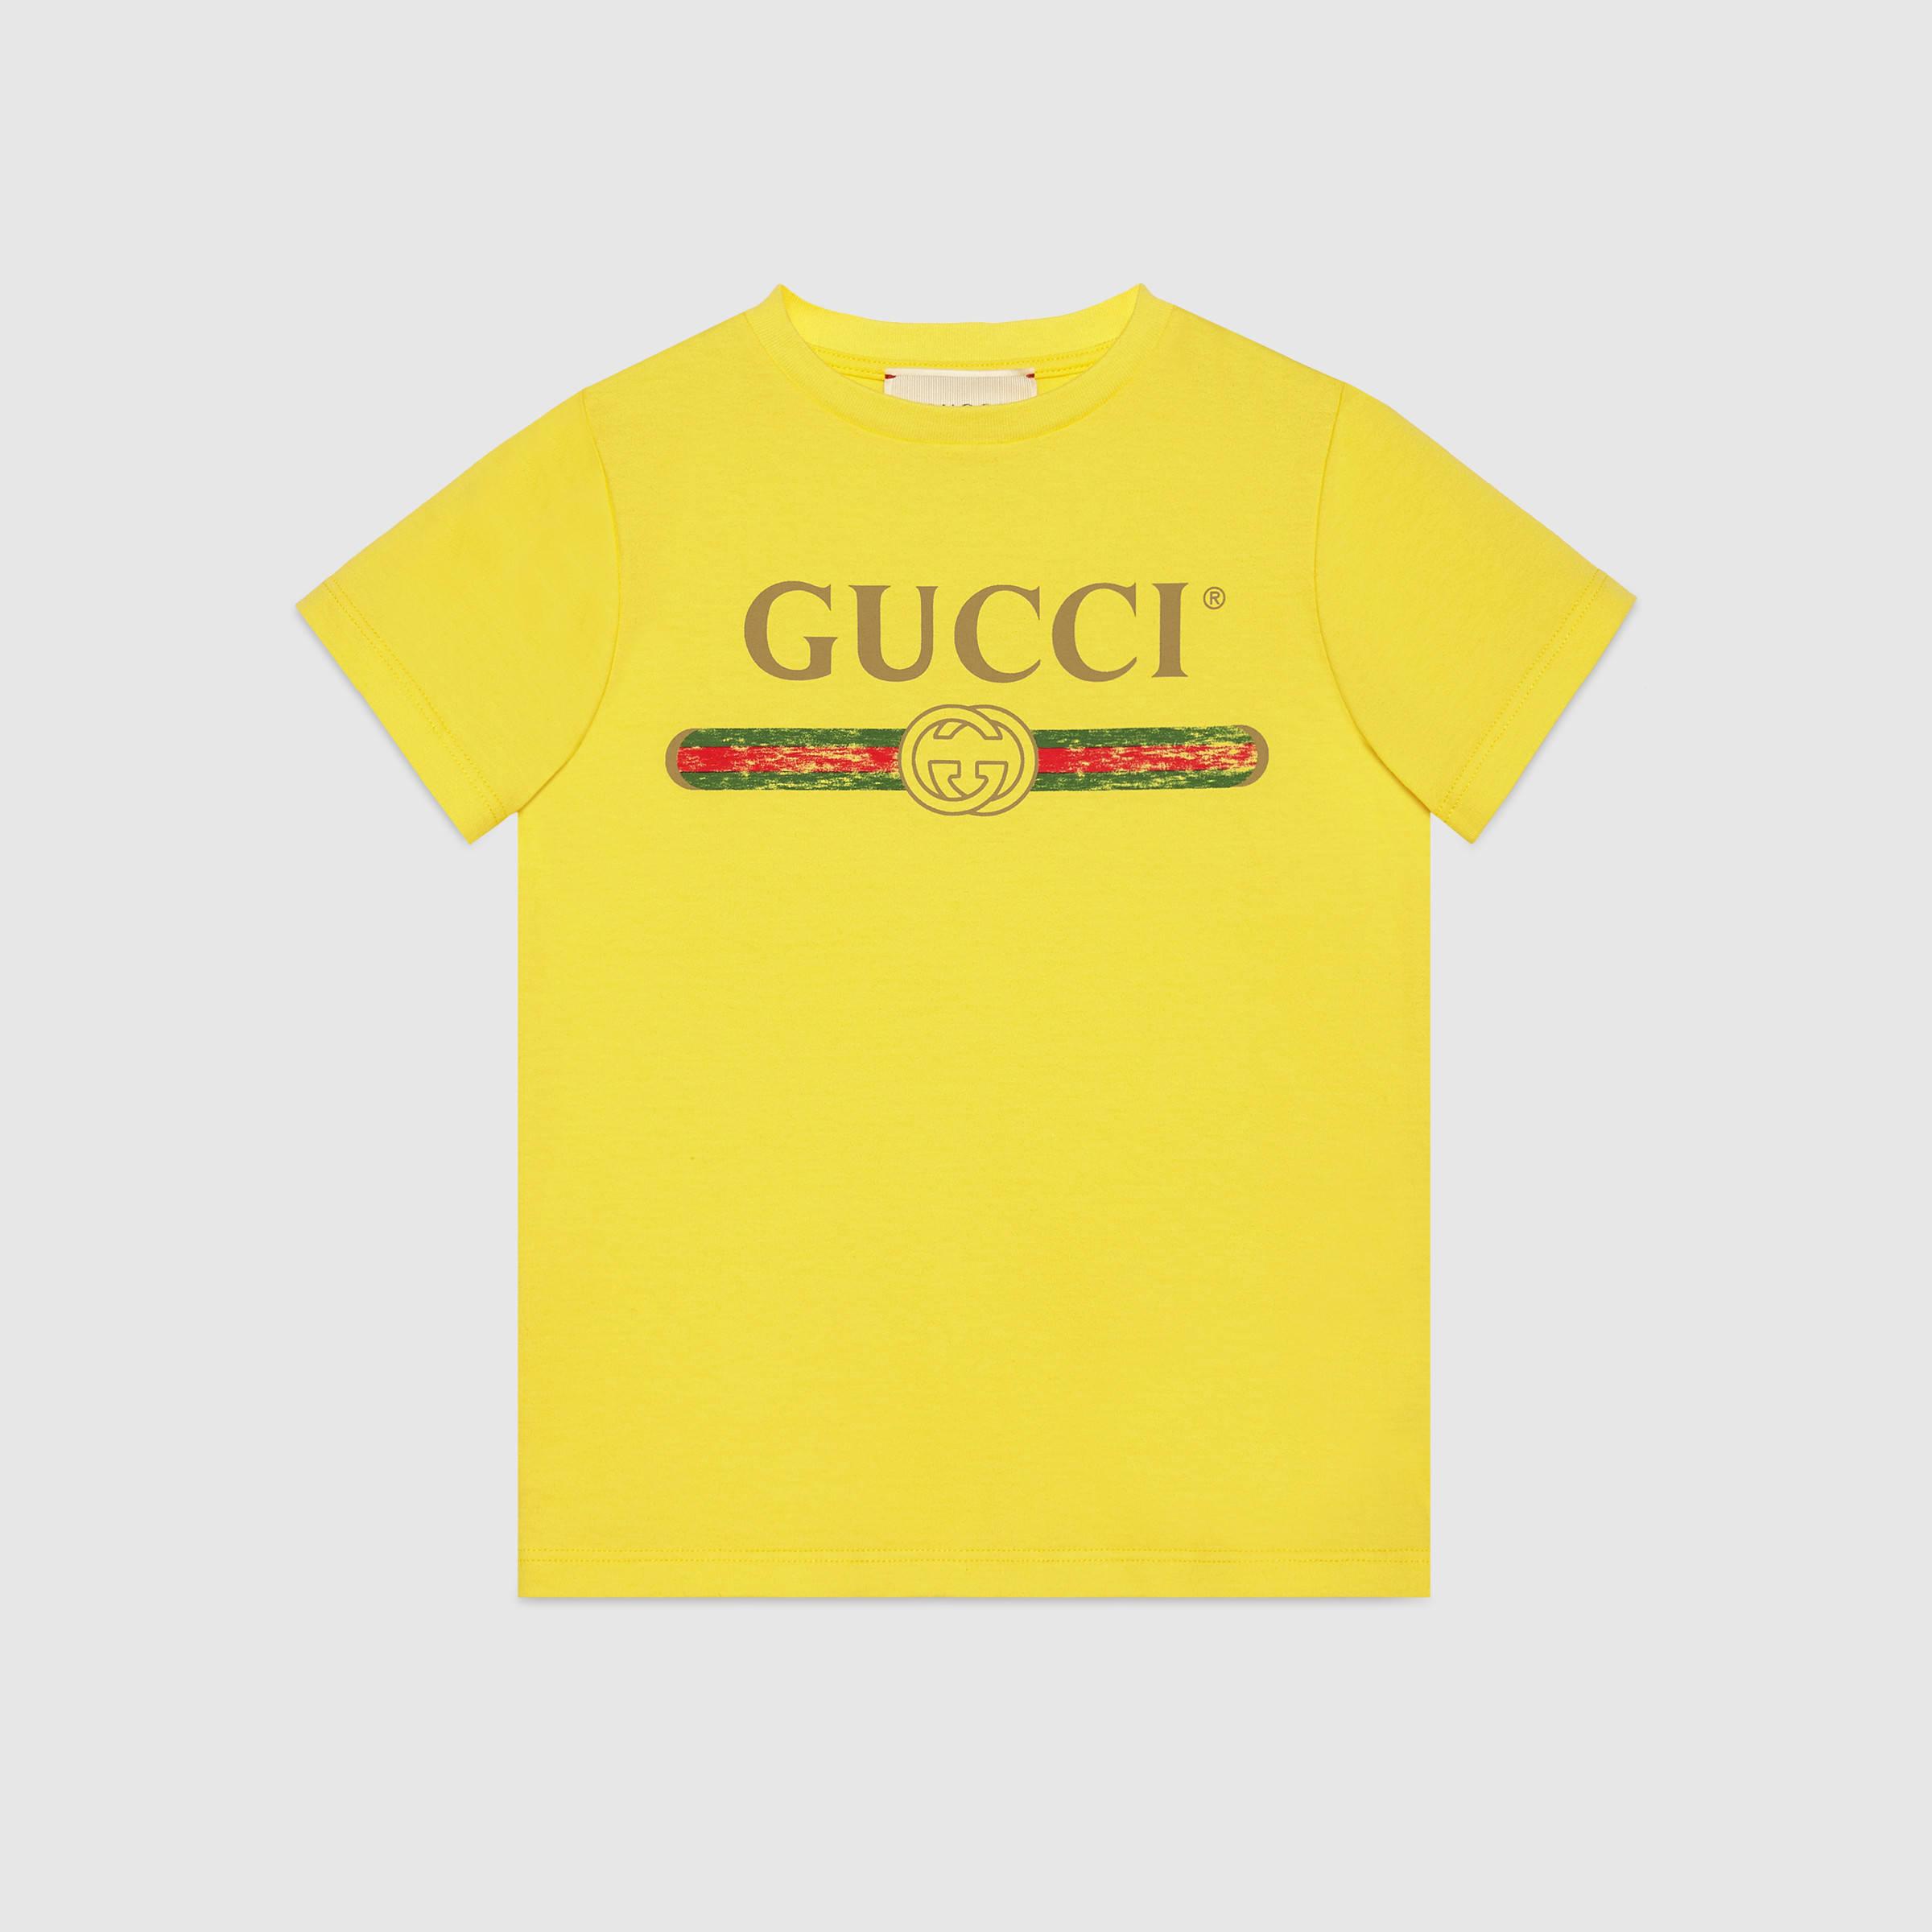 Real Gucci Logo - Discount Real Gucci Childrens cotton T-shirt with Gucci logo For ...